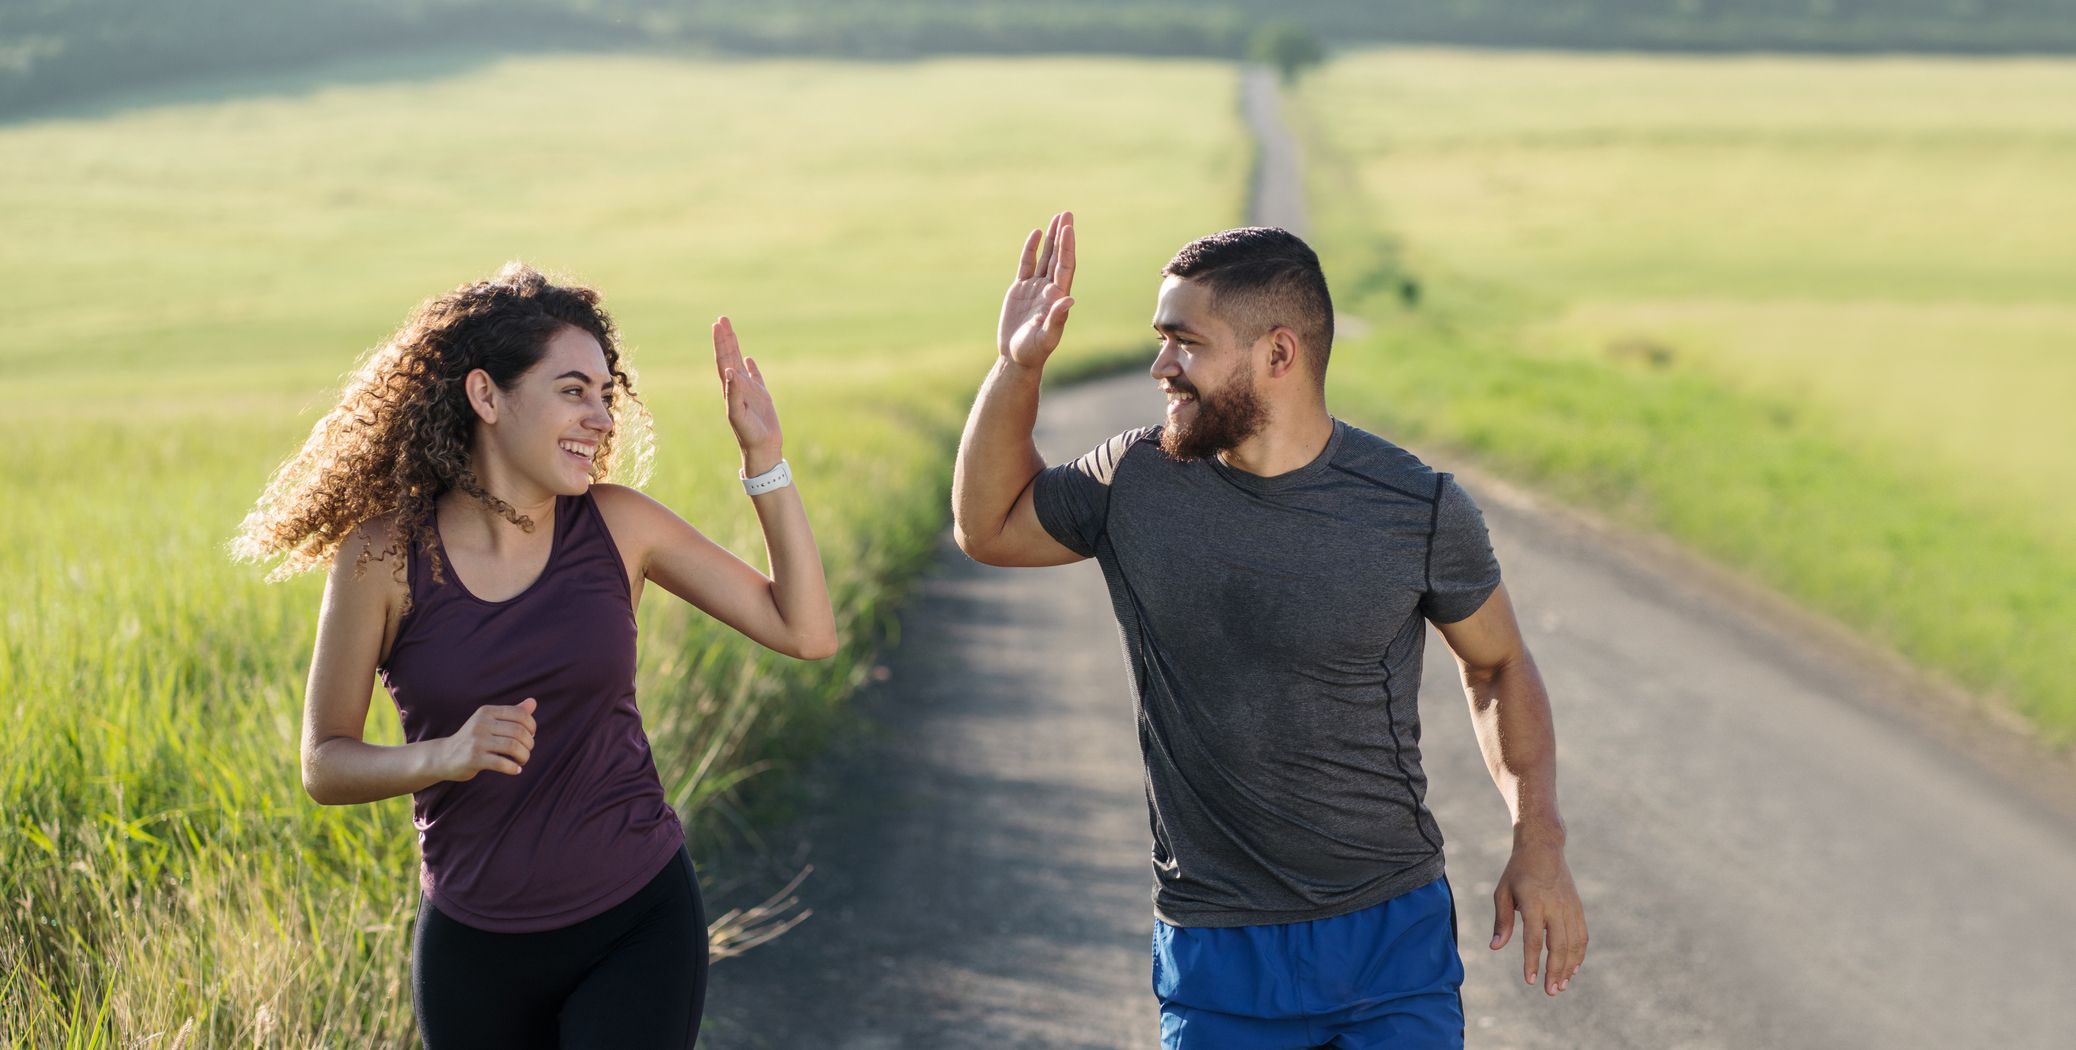 A fun young latin couple running in the countryside, high-fiving and smiling at each other.